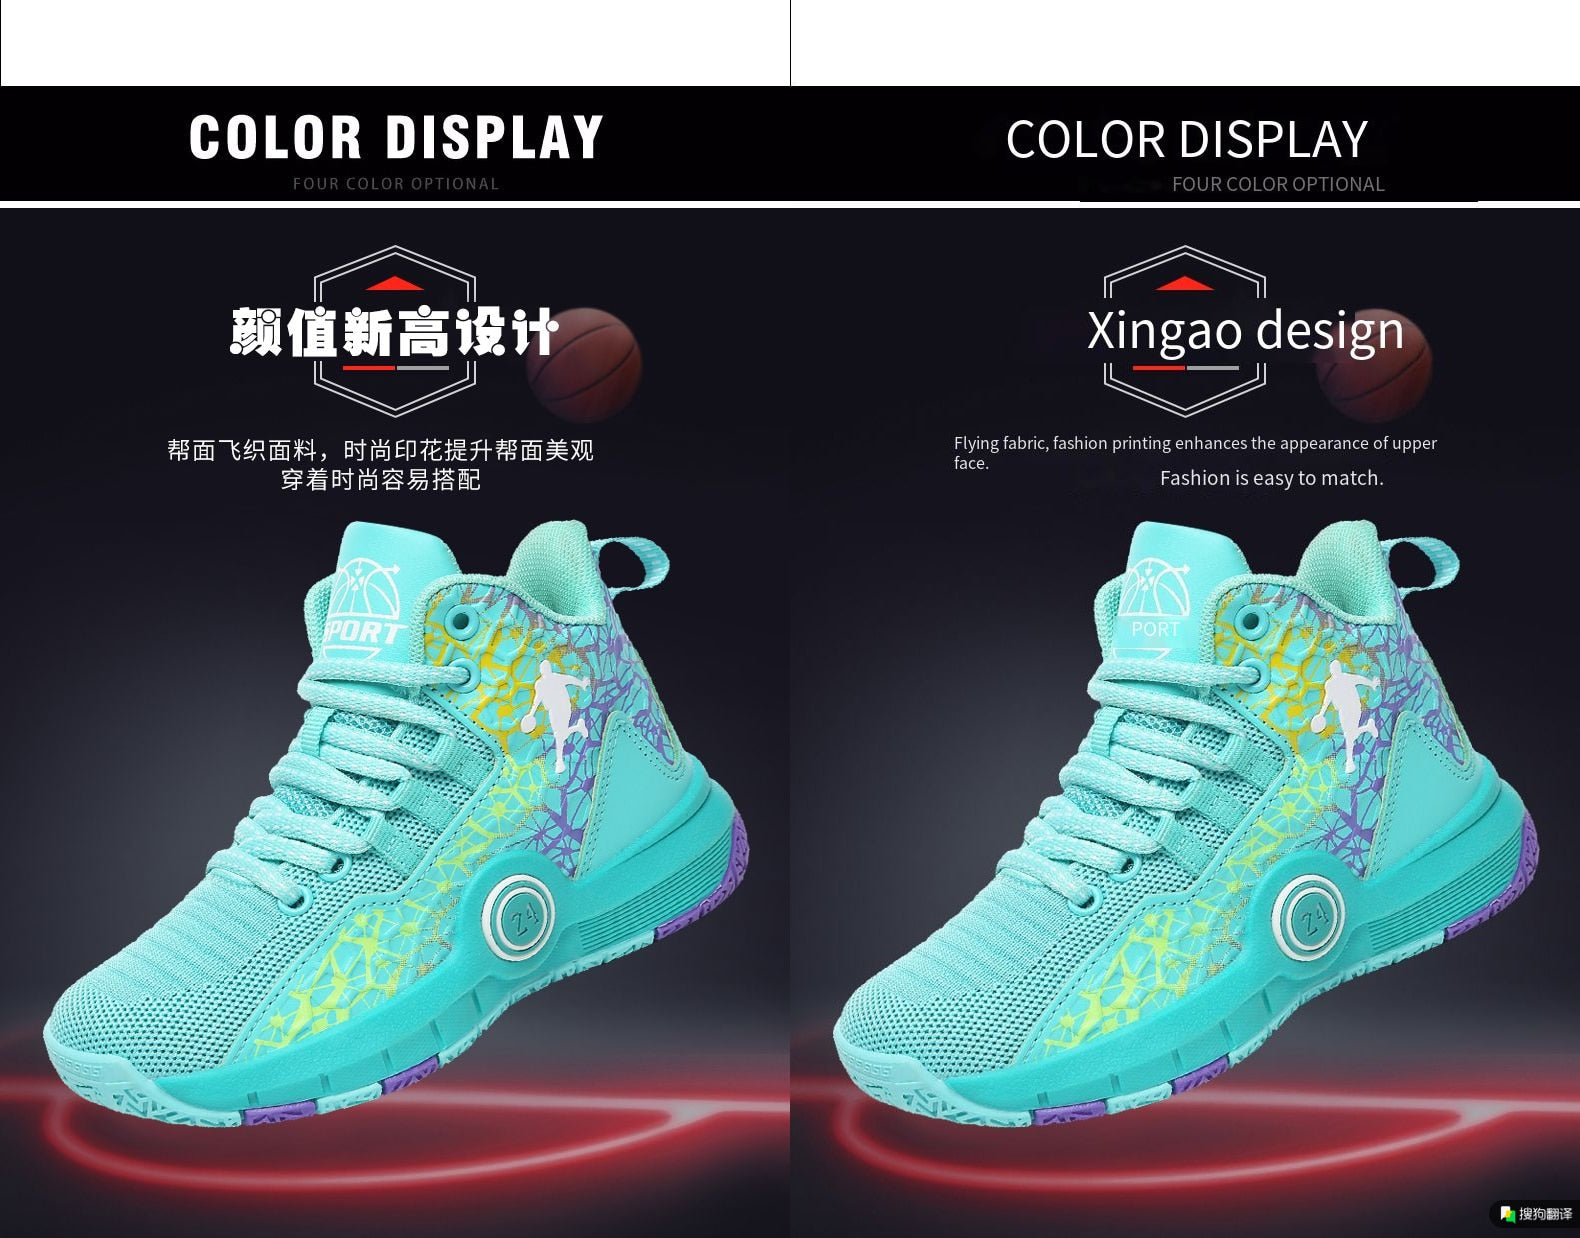 Kids Boys Basketball Shoes Kids Sneakers Non-Slip Sports Girls Basketball Training Tennis Shoes The Clothing Company Sydney